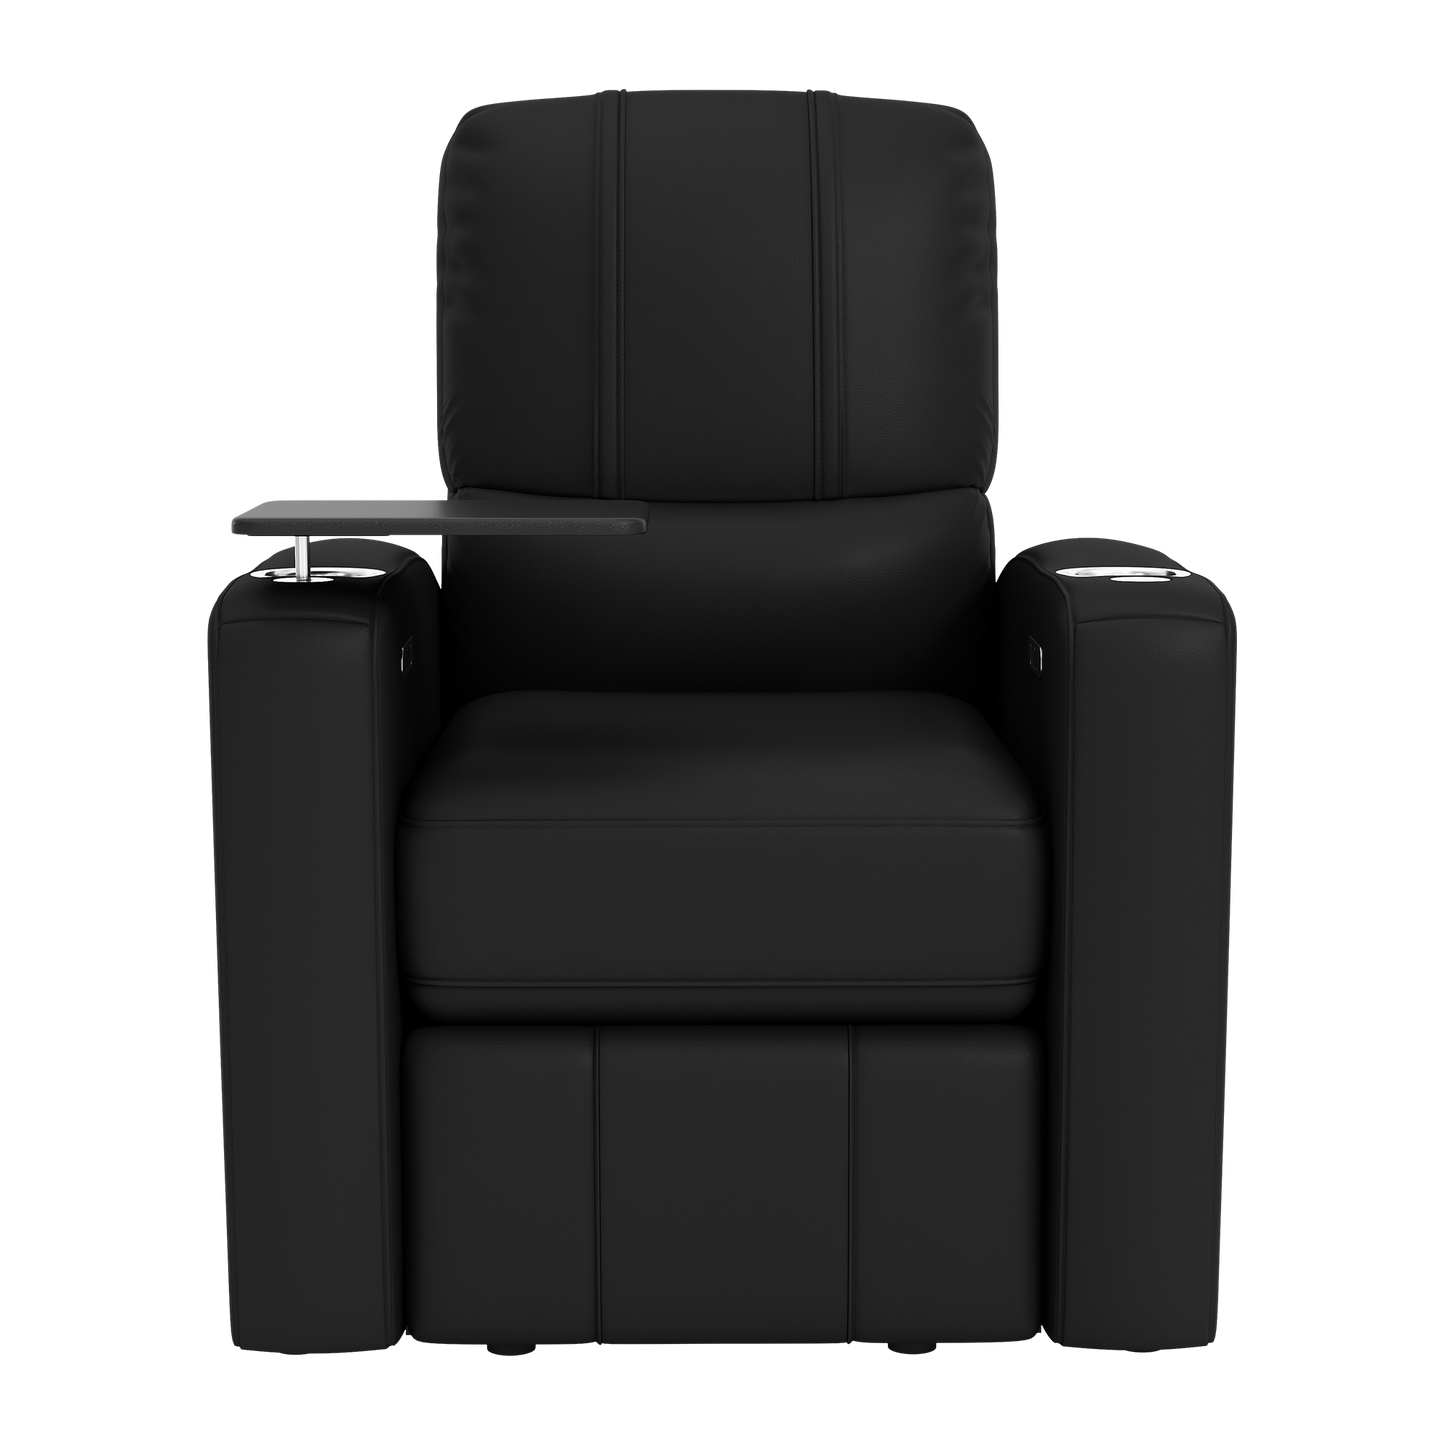 Stealth Power Plus Recliner with Florida Gulf Coast University Secondary Logo